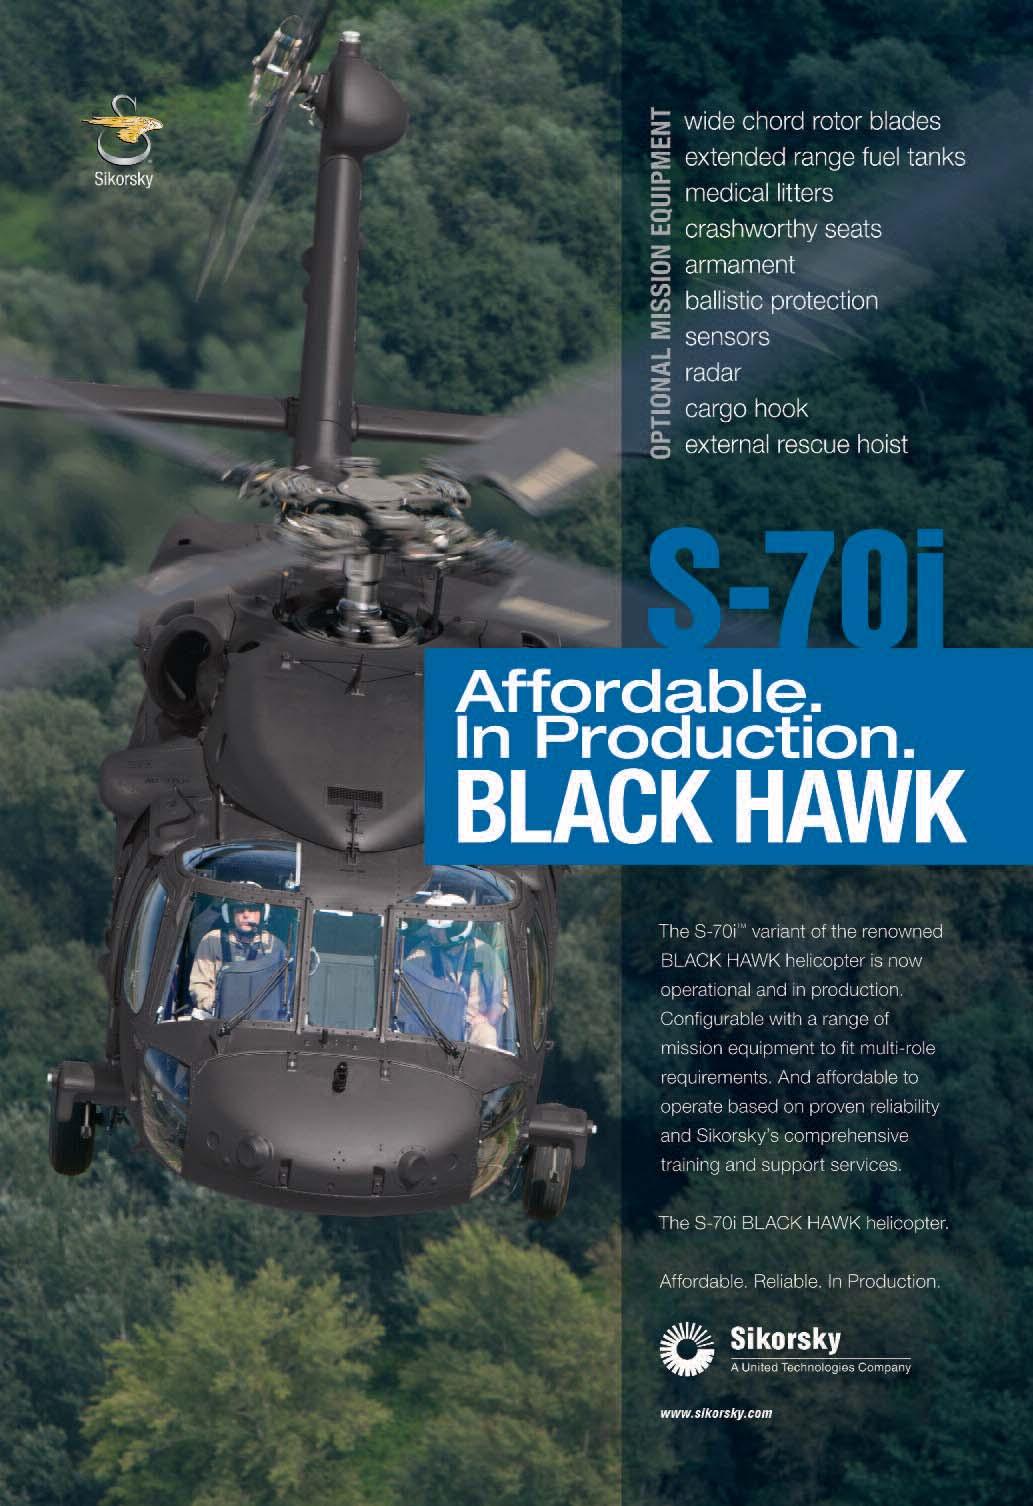 Article from: The European Security and Defence Union Issue 14